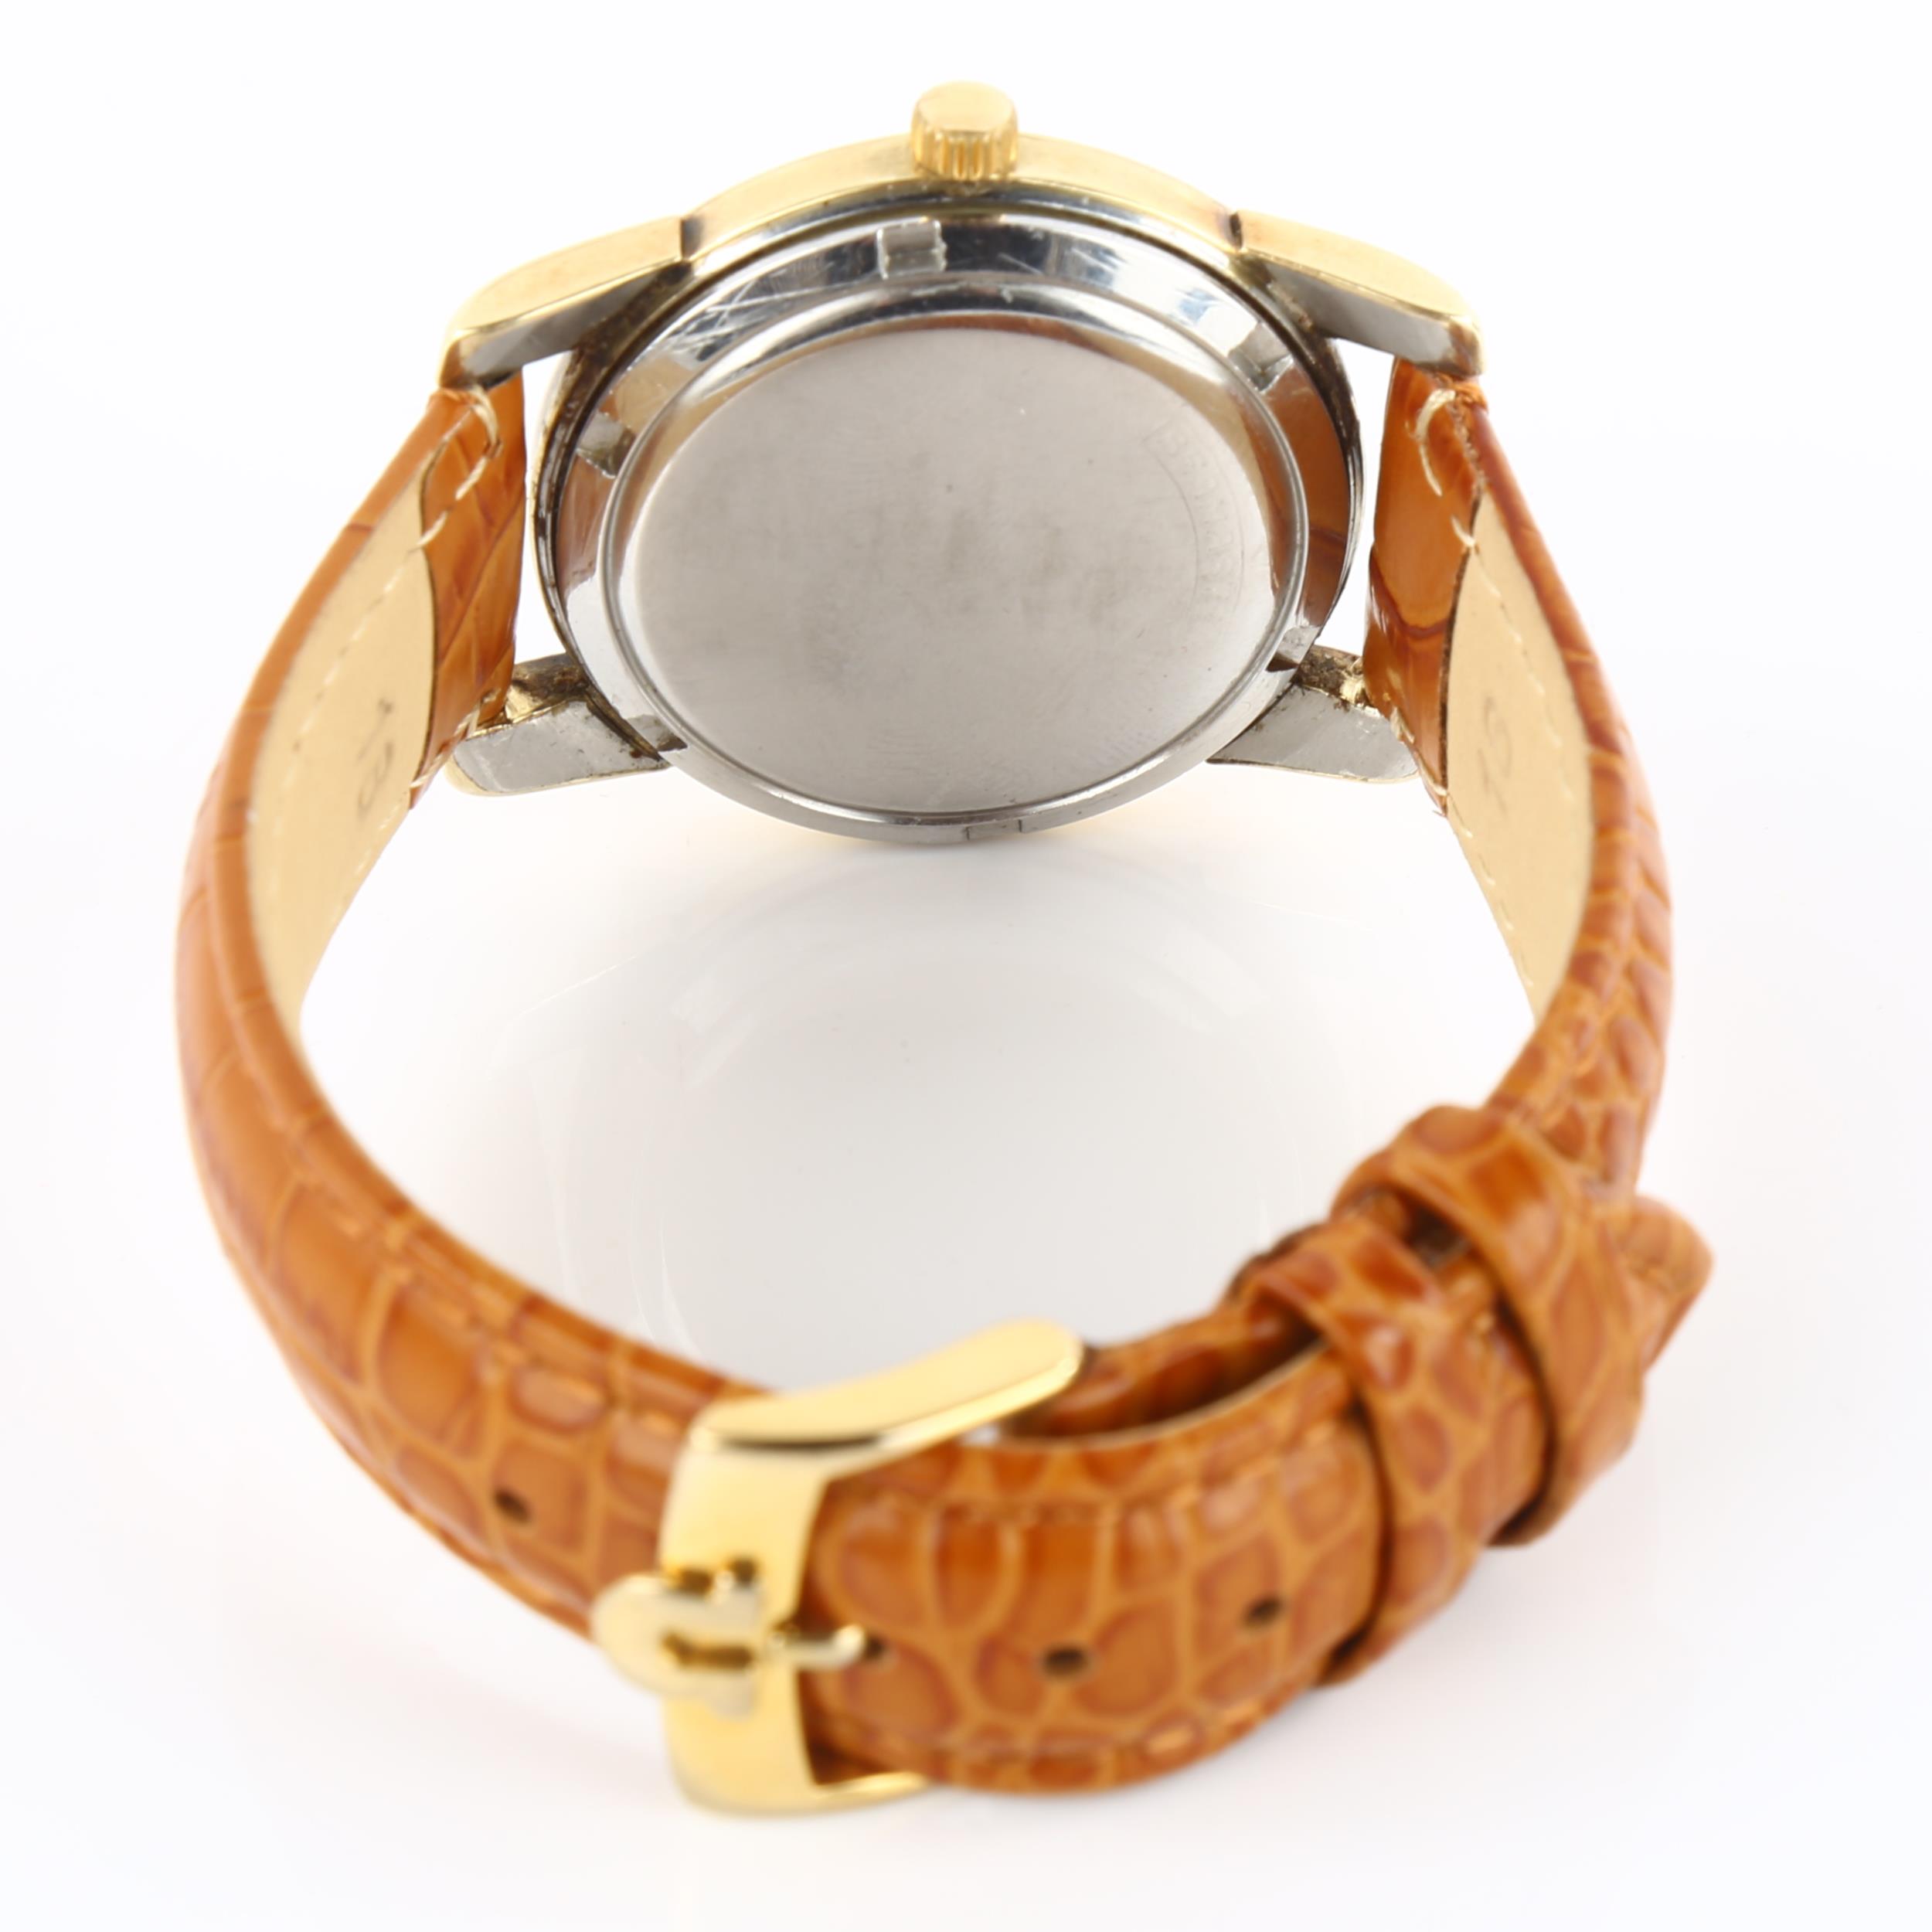 OMEGA - a gold plated stainless steel Seamaster 'Bumper' automatic wristwatch, ref. C2576-1, circa - Image 4 of 5